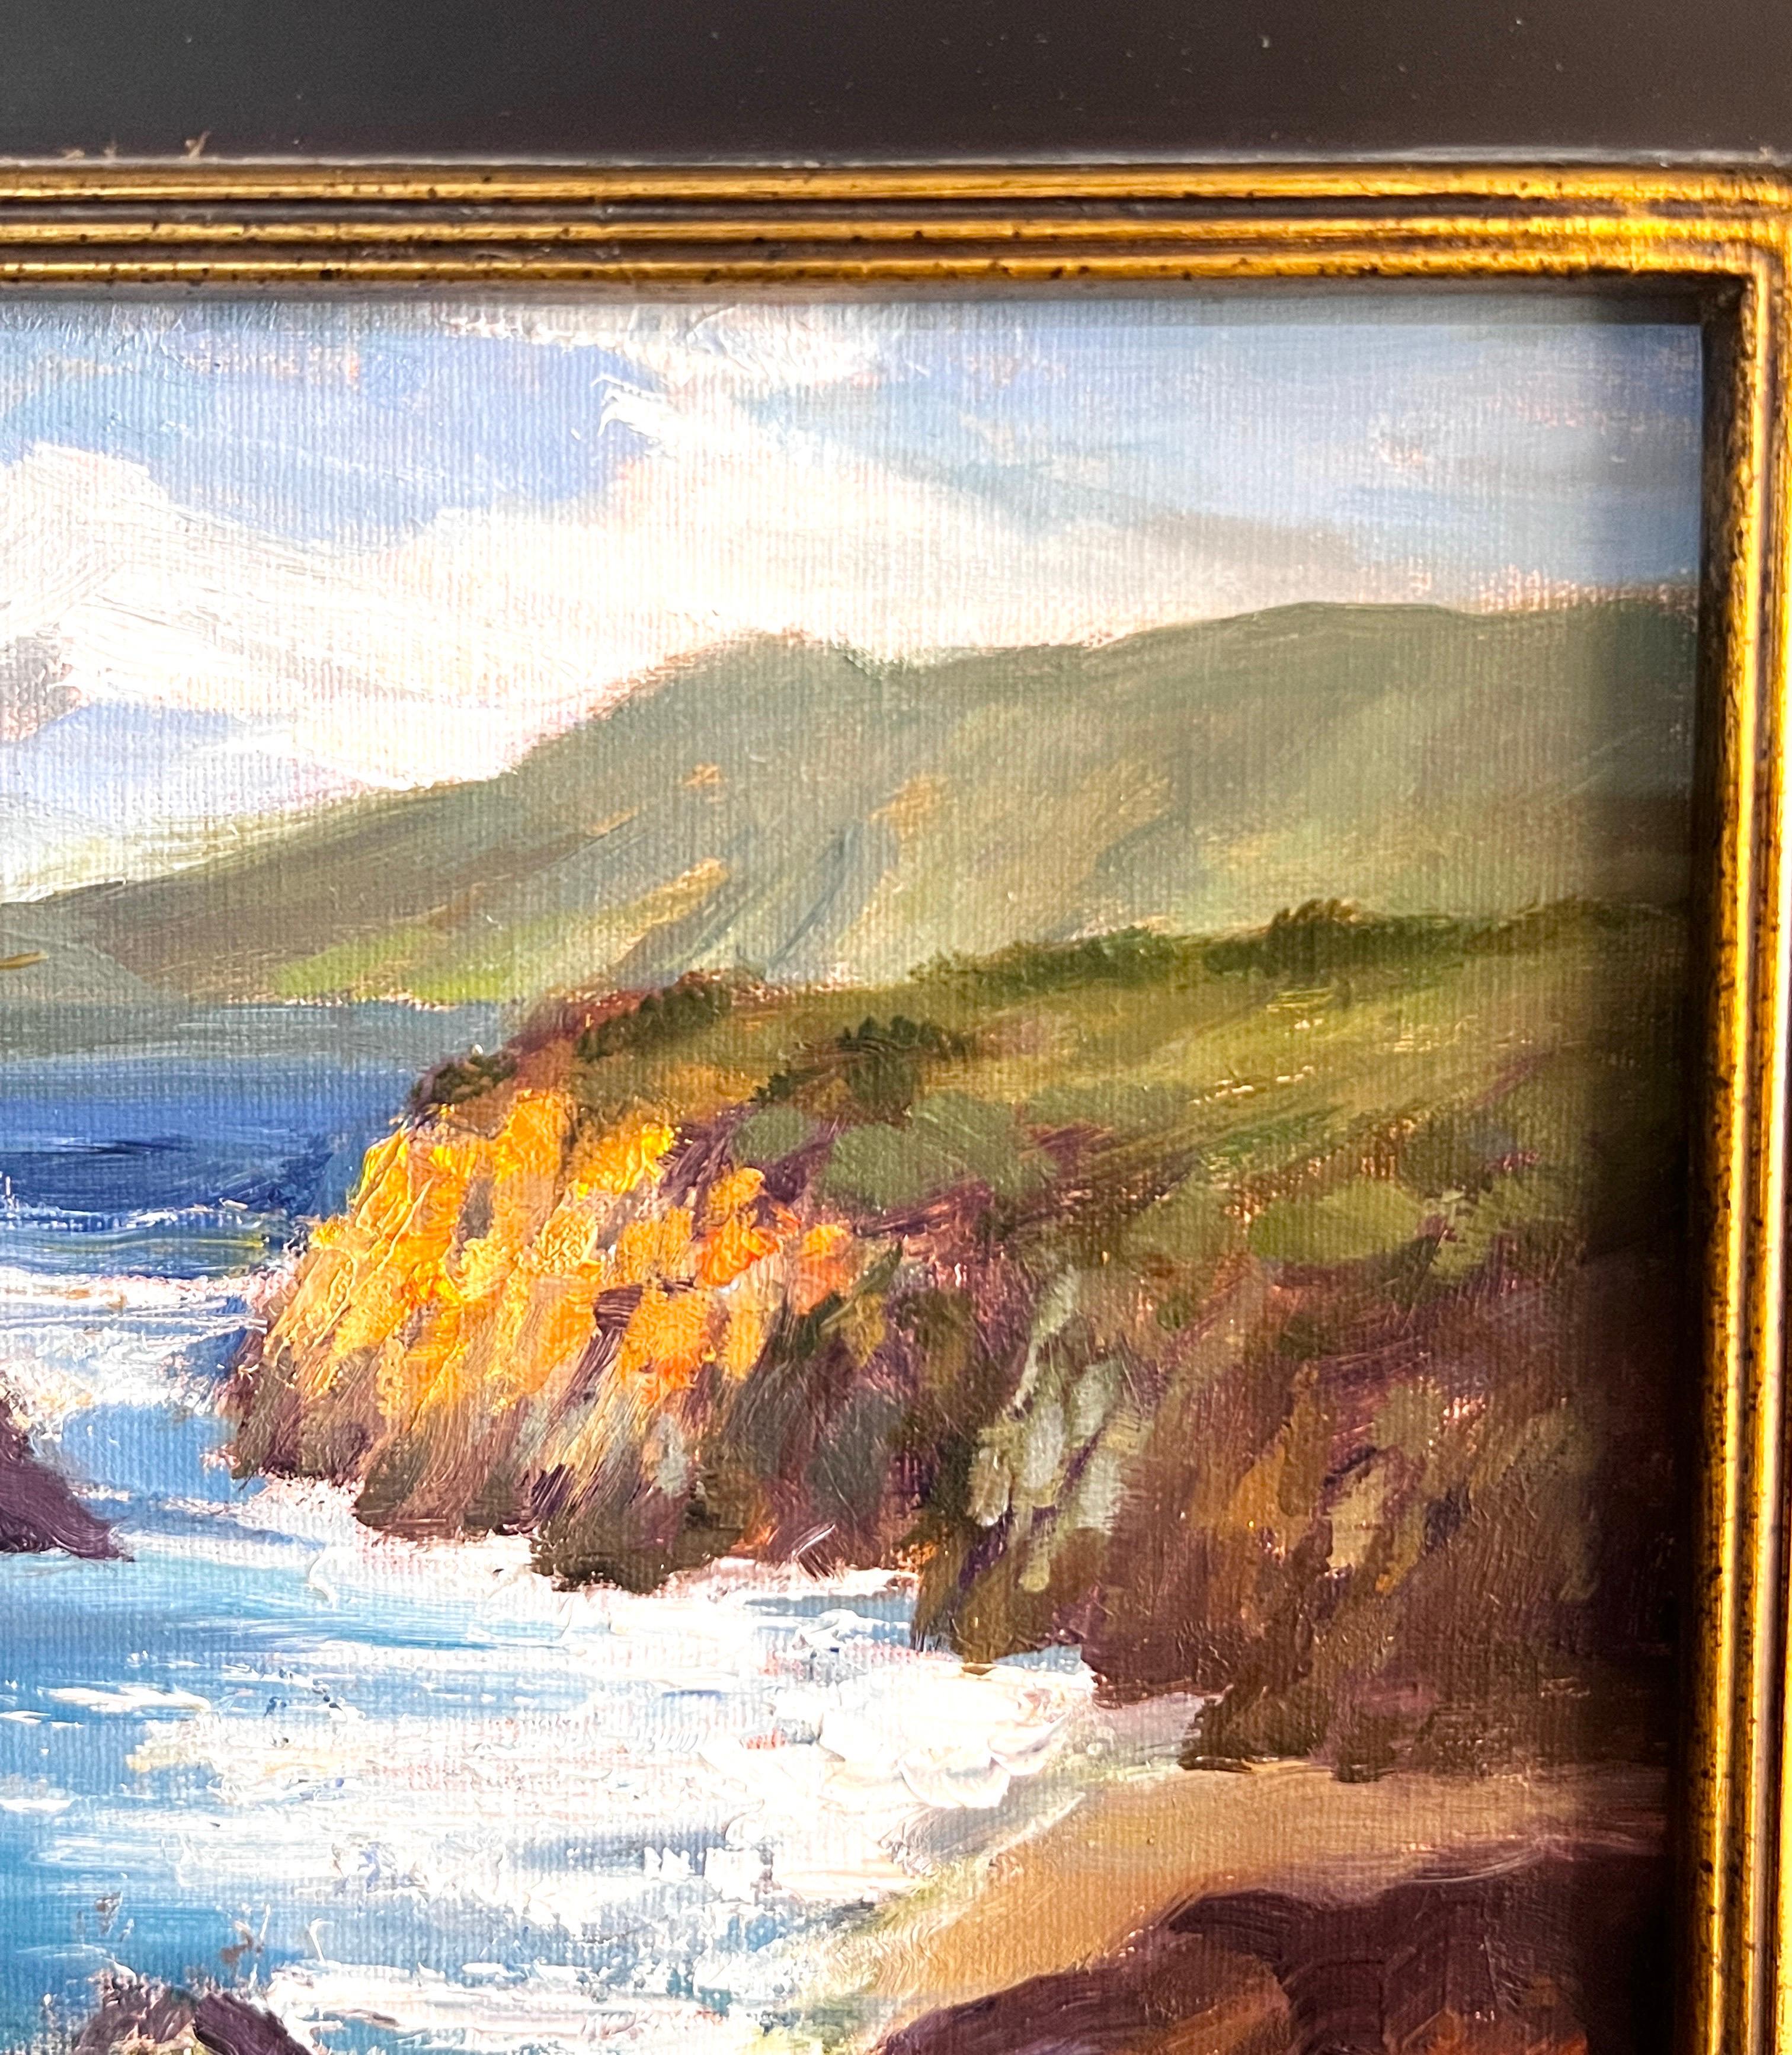 The oil painting size is 8.25 x10.25 inches on board. Lynn Gertenbach was a plein air painter and art teacher based in Southern California who drew inspiration from the natural beauty of her surroundings. This particular painting captures the